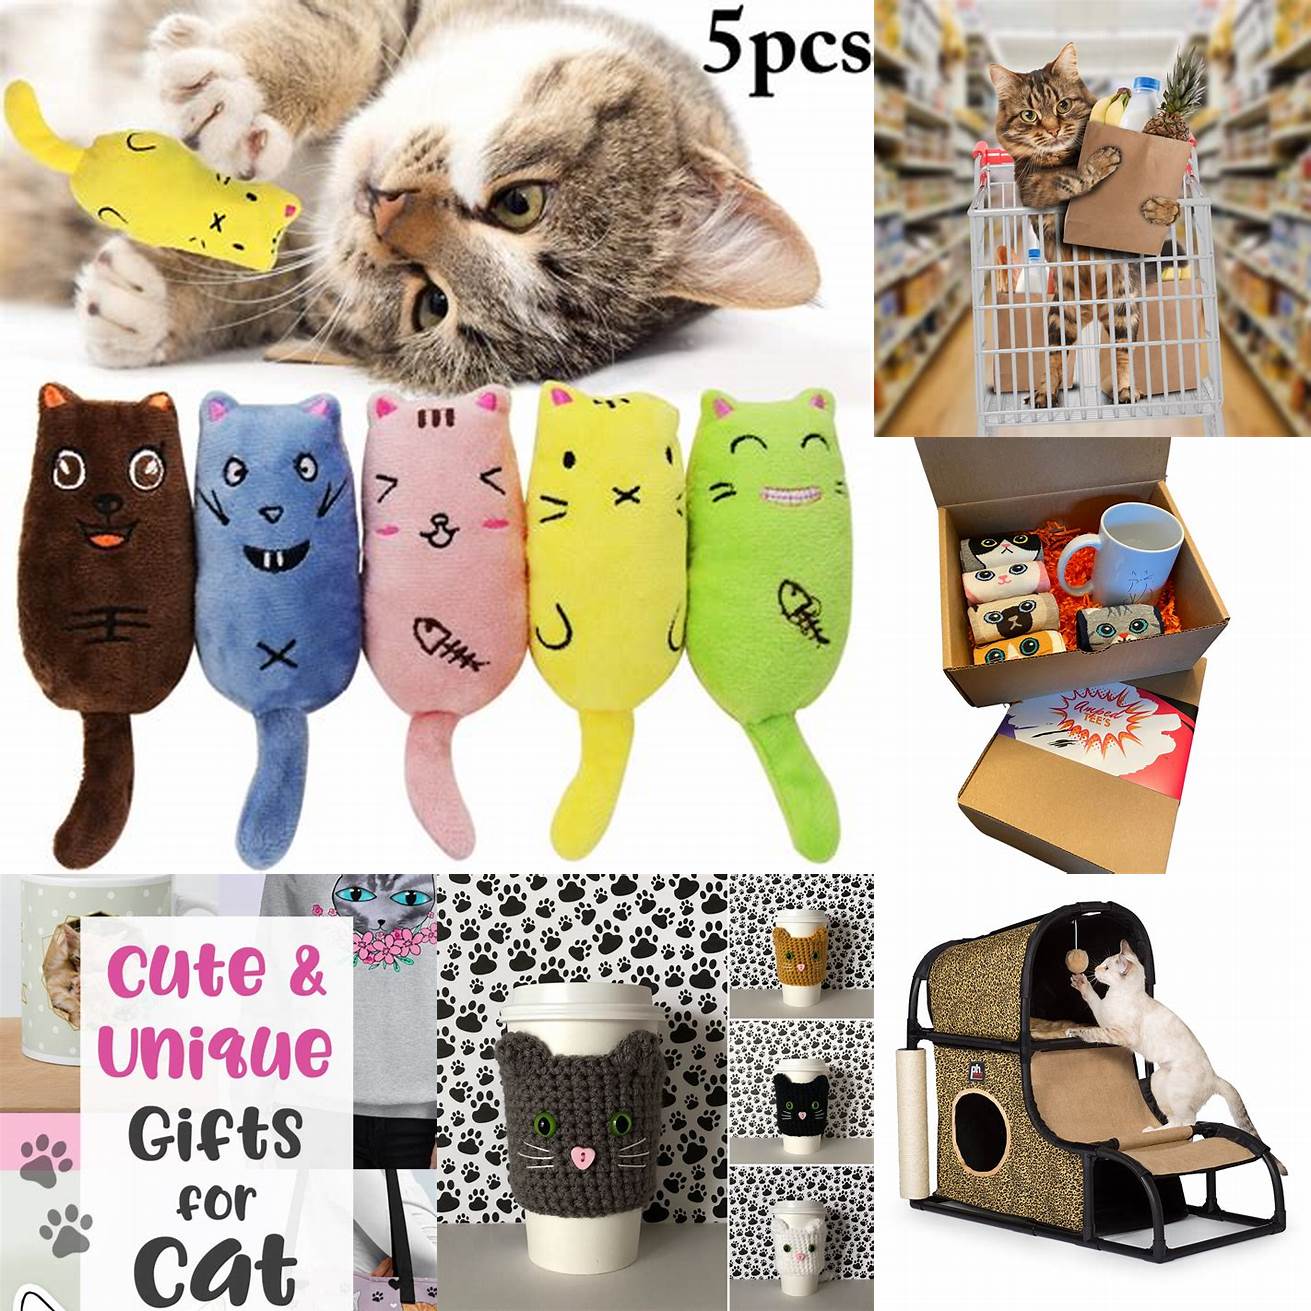 Cat-Related Items